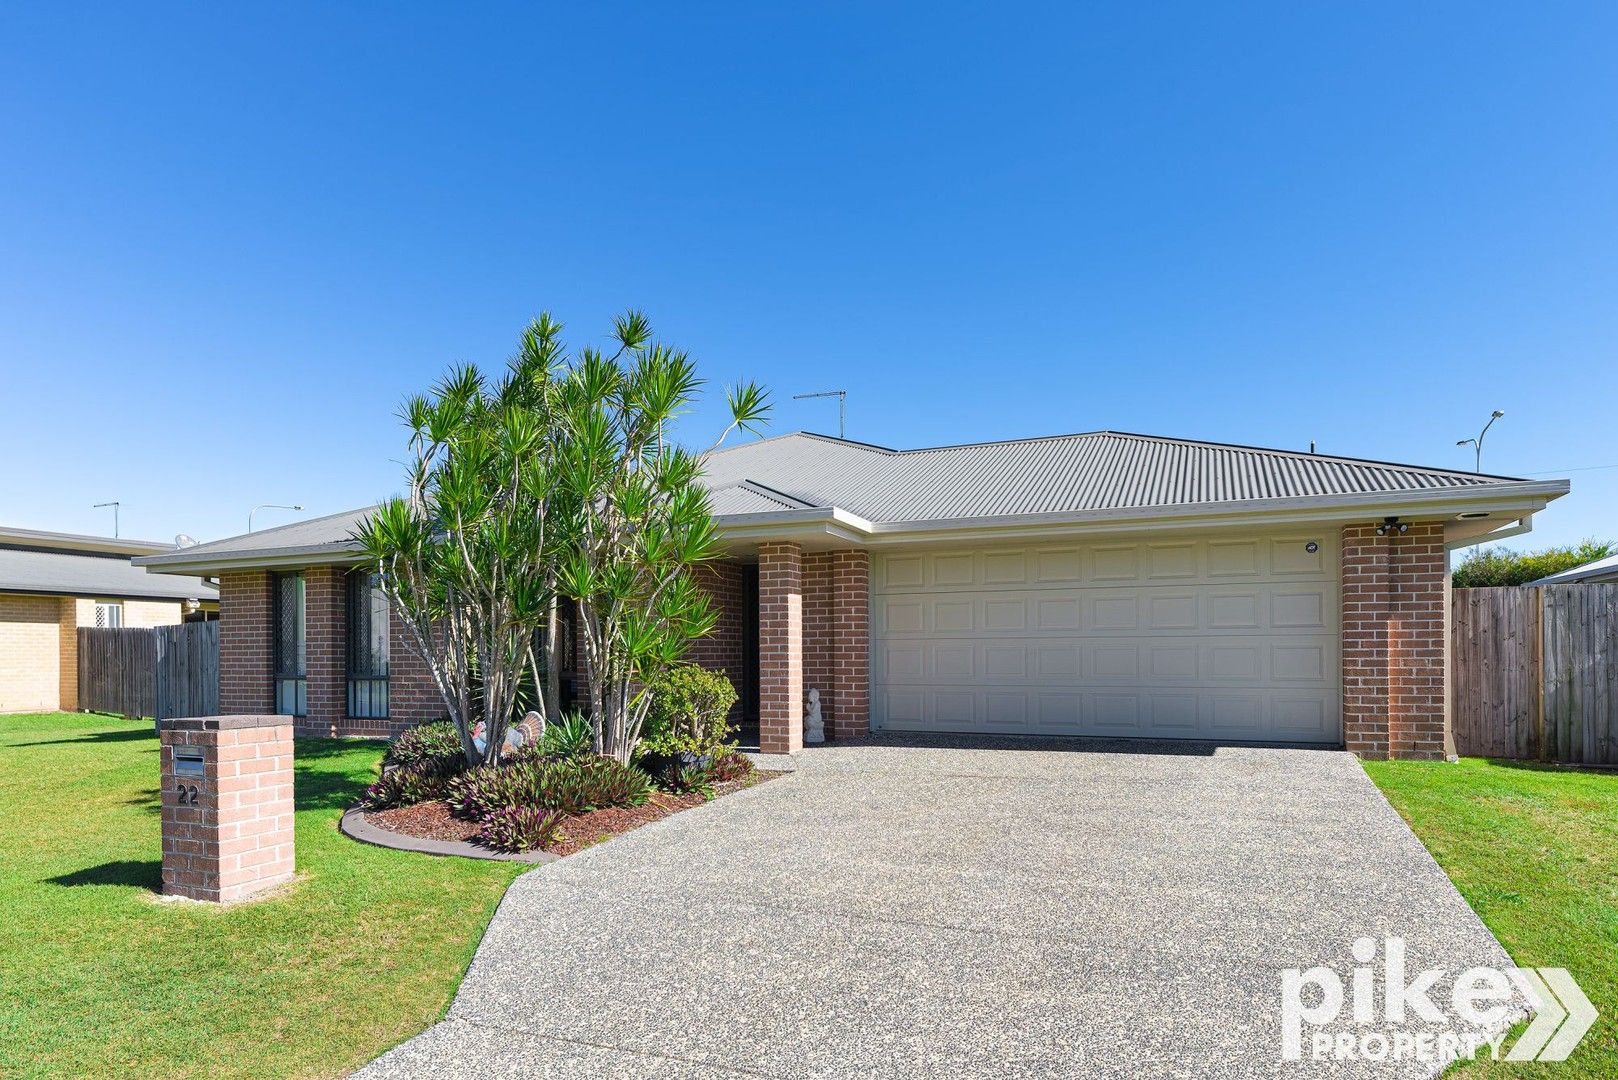 4 bedrooms House in 22 Racemosa Street CABOOLTURE QLD, 4510